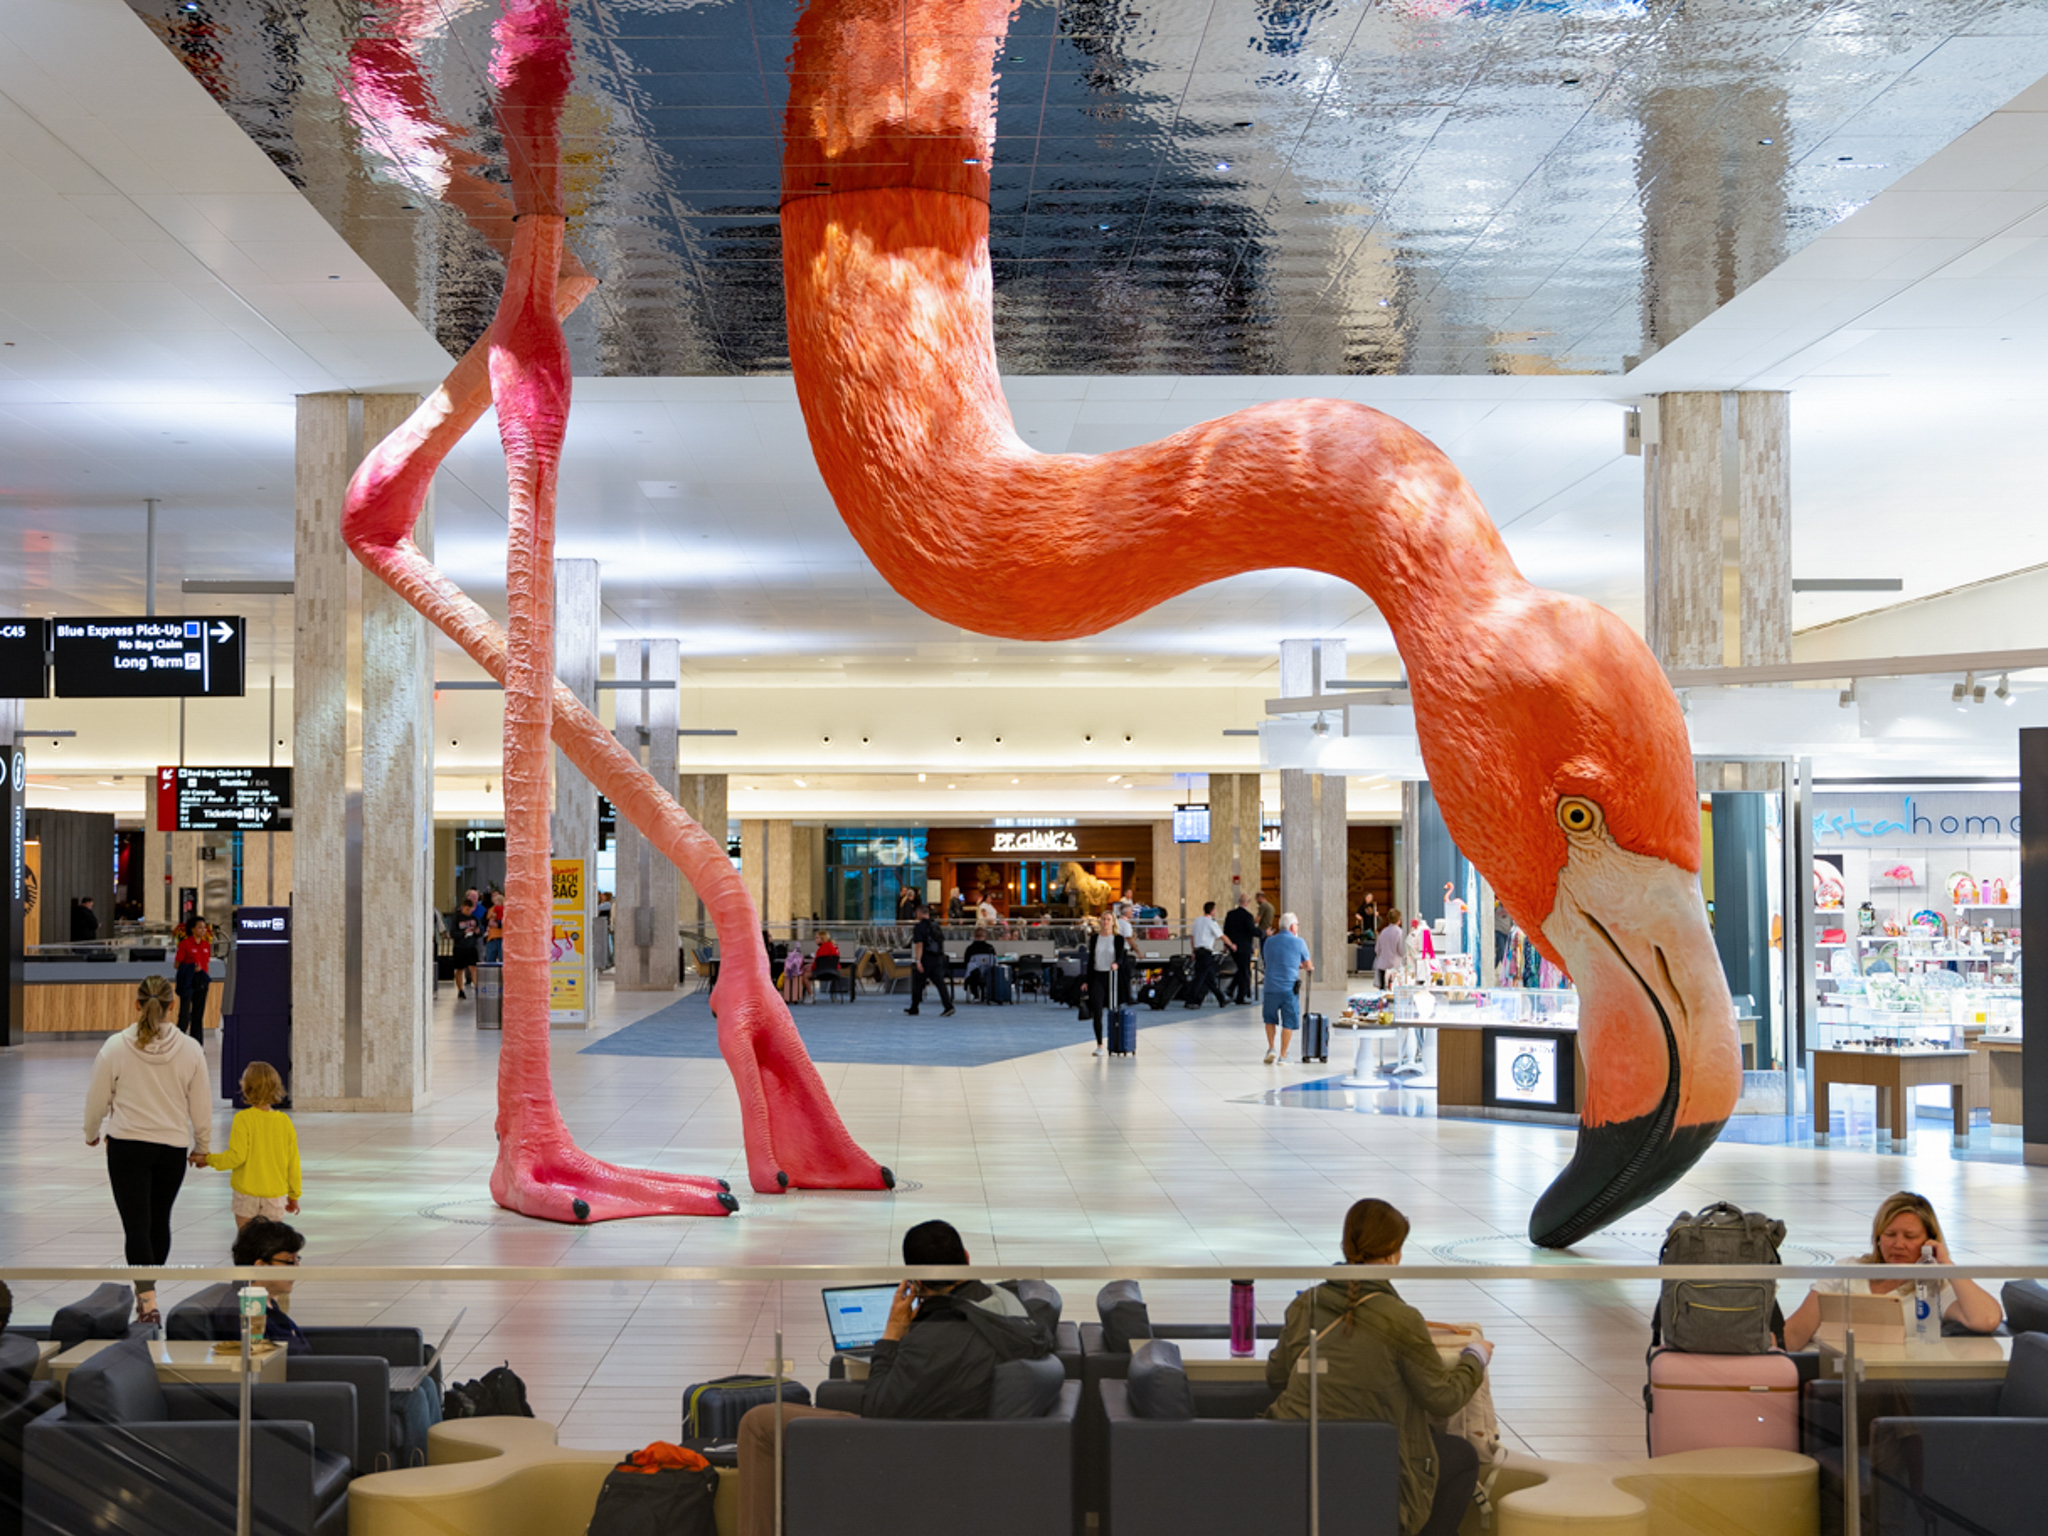 A monumental installation in an airport terminal of a realistic flamingo.